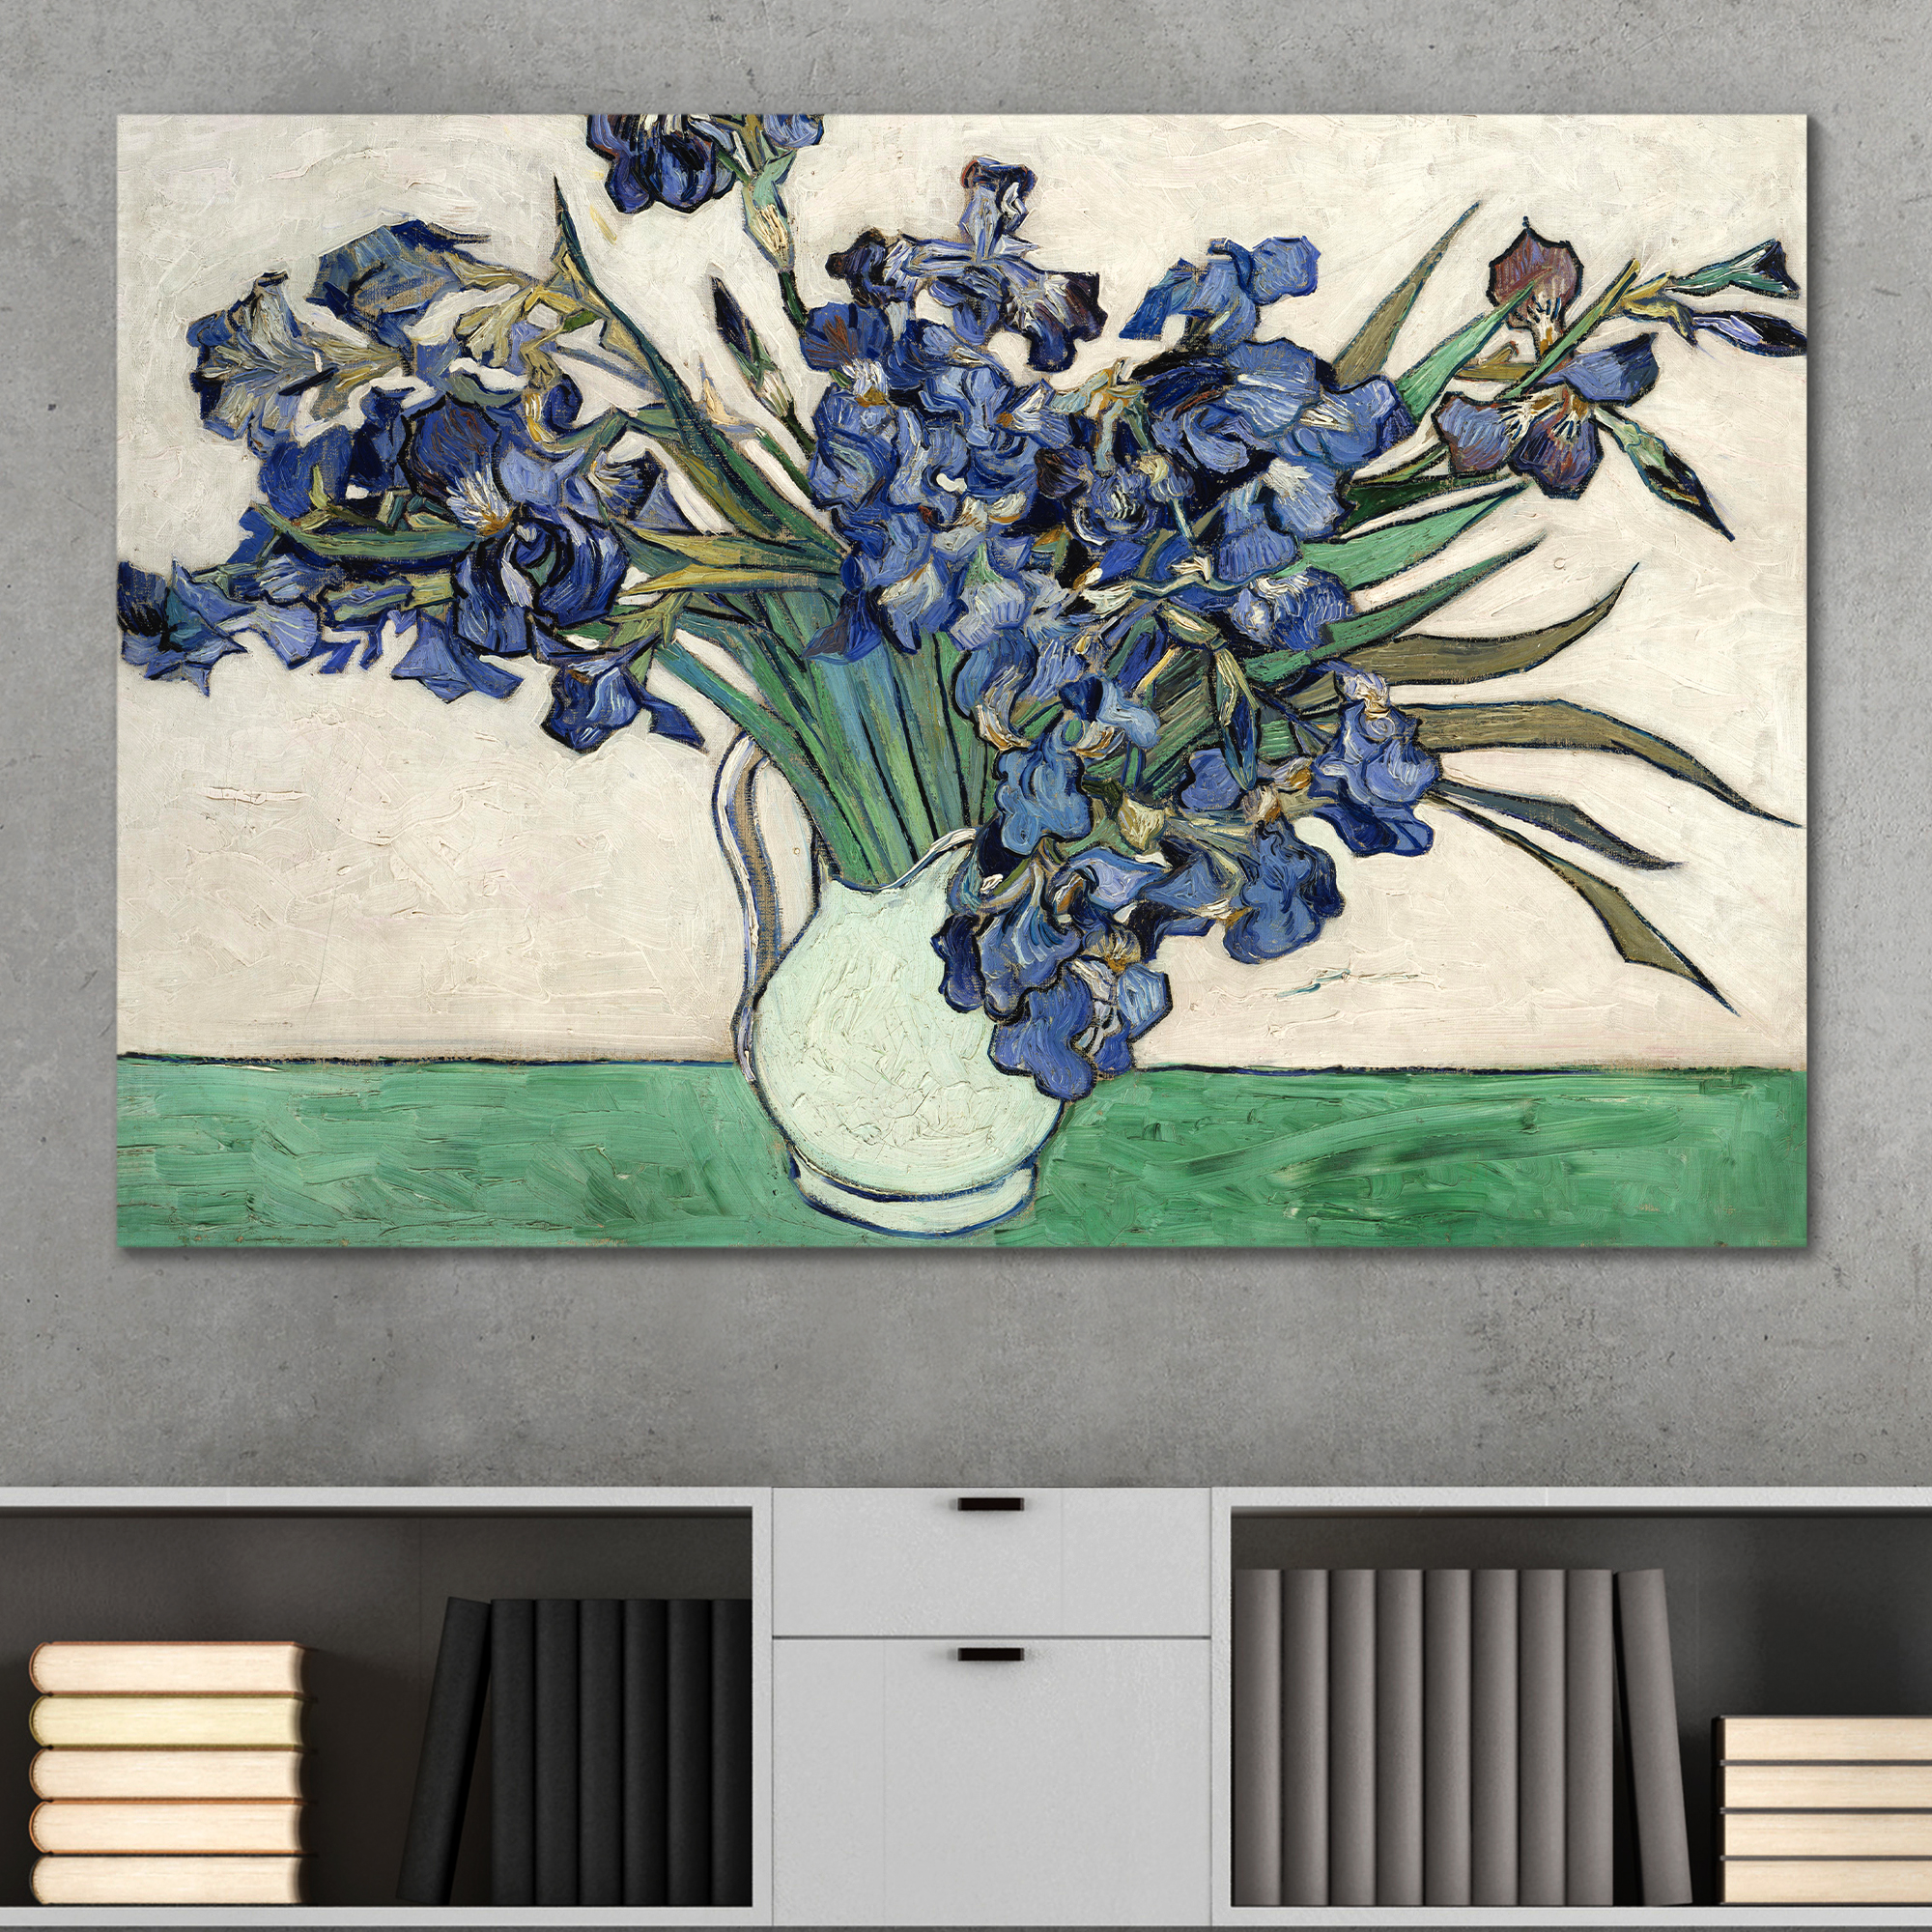 Irises in a Vase by Vincent Van Gogh - Oil Painting Reproduction on Canvas Prints Wall Art, Ready to Hang - 32